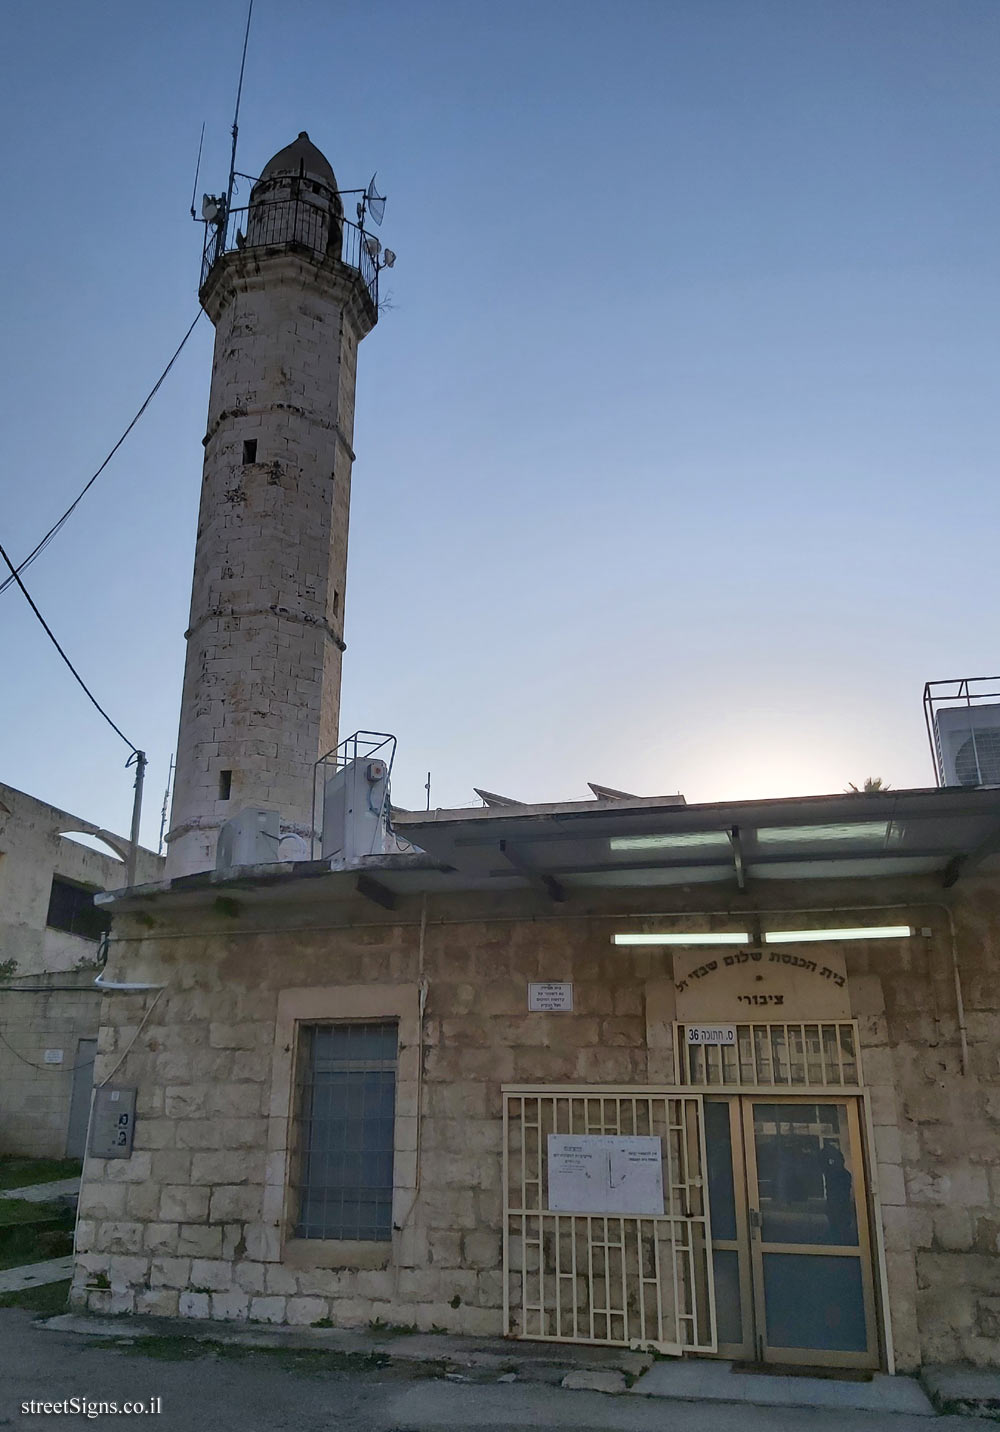 Yehud - An Irgun observation post at the top of a mosque tower - Se’adya Khatuka St 36, Yehud-Monosson, Israel